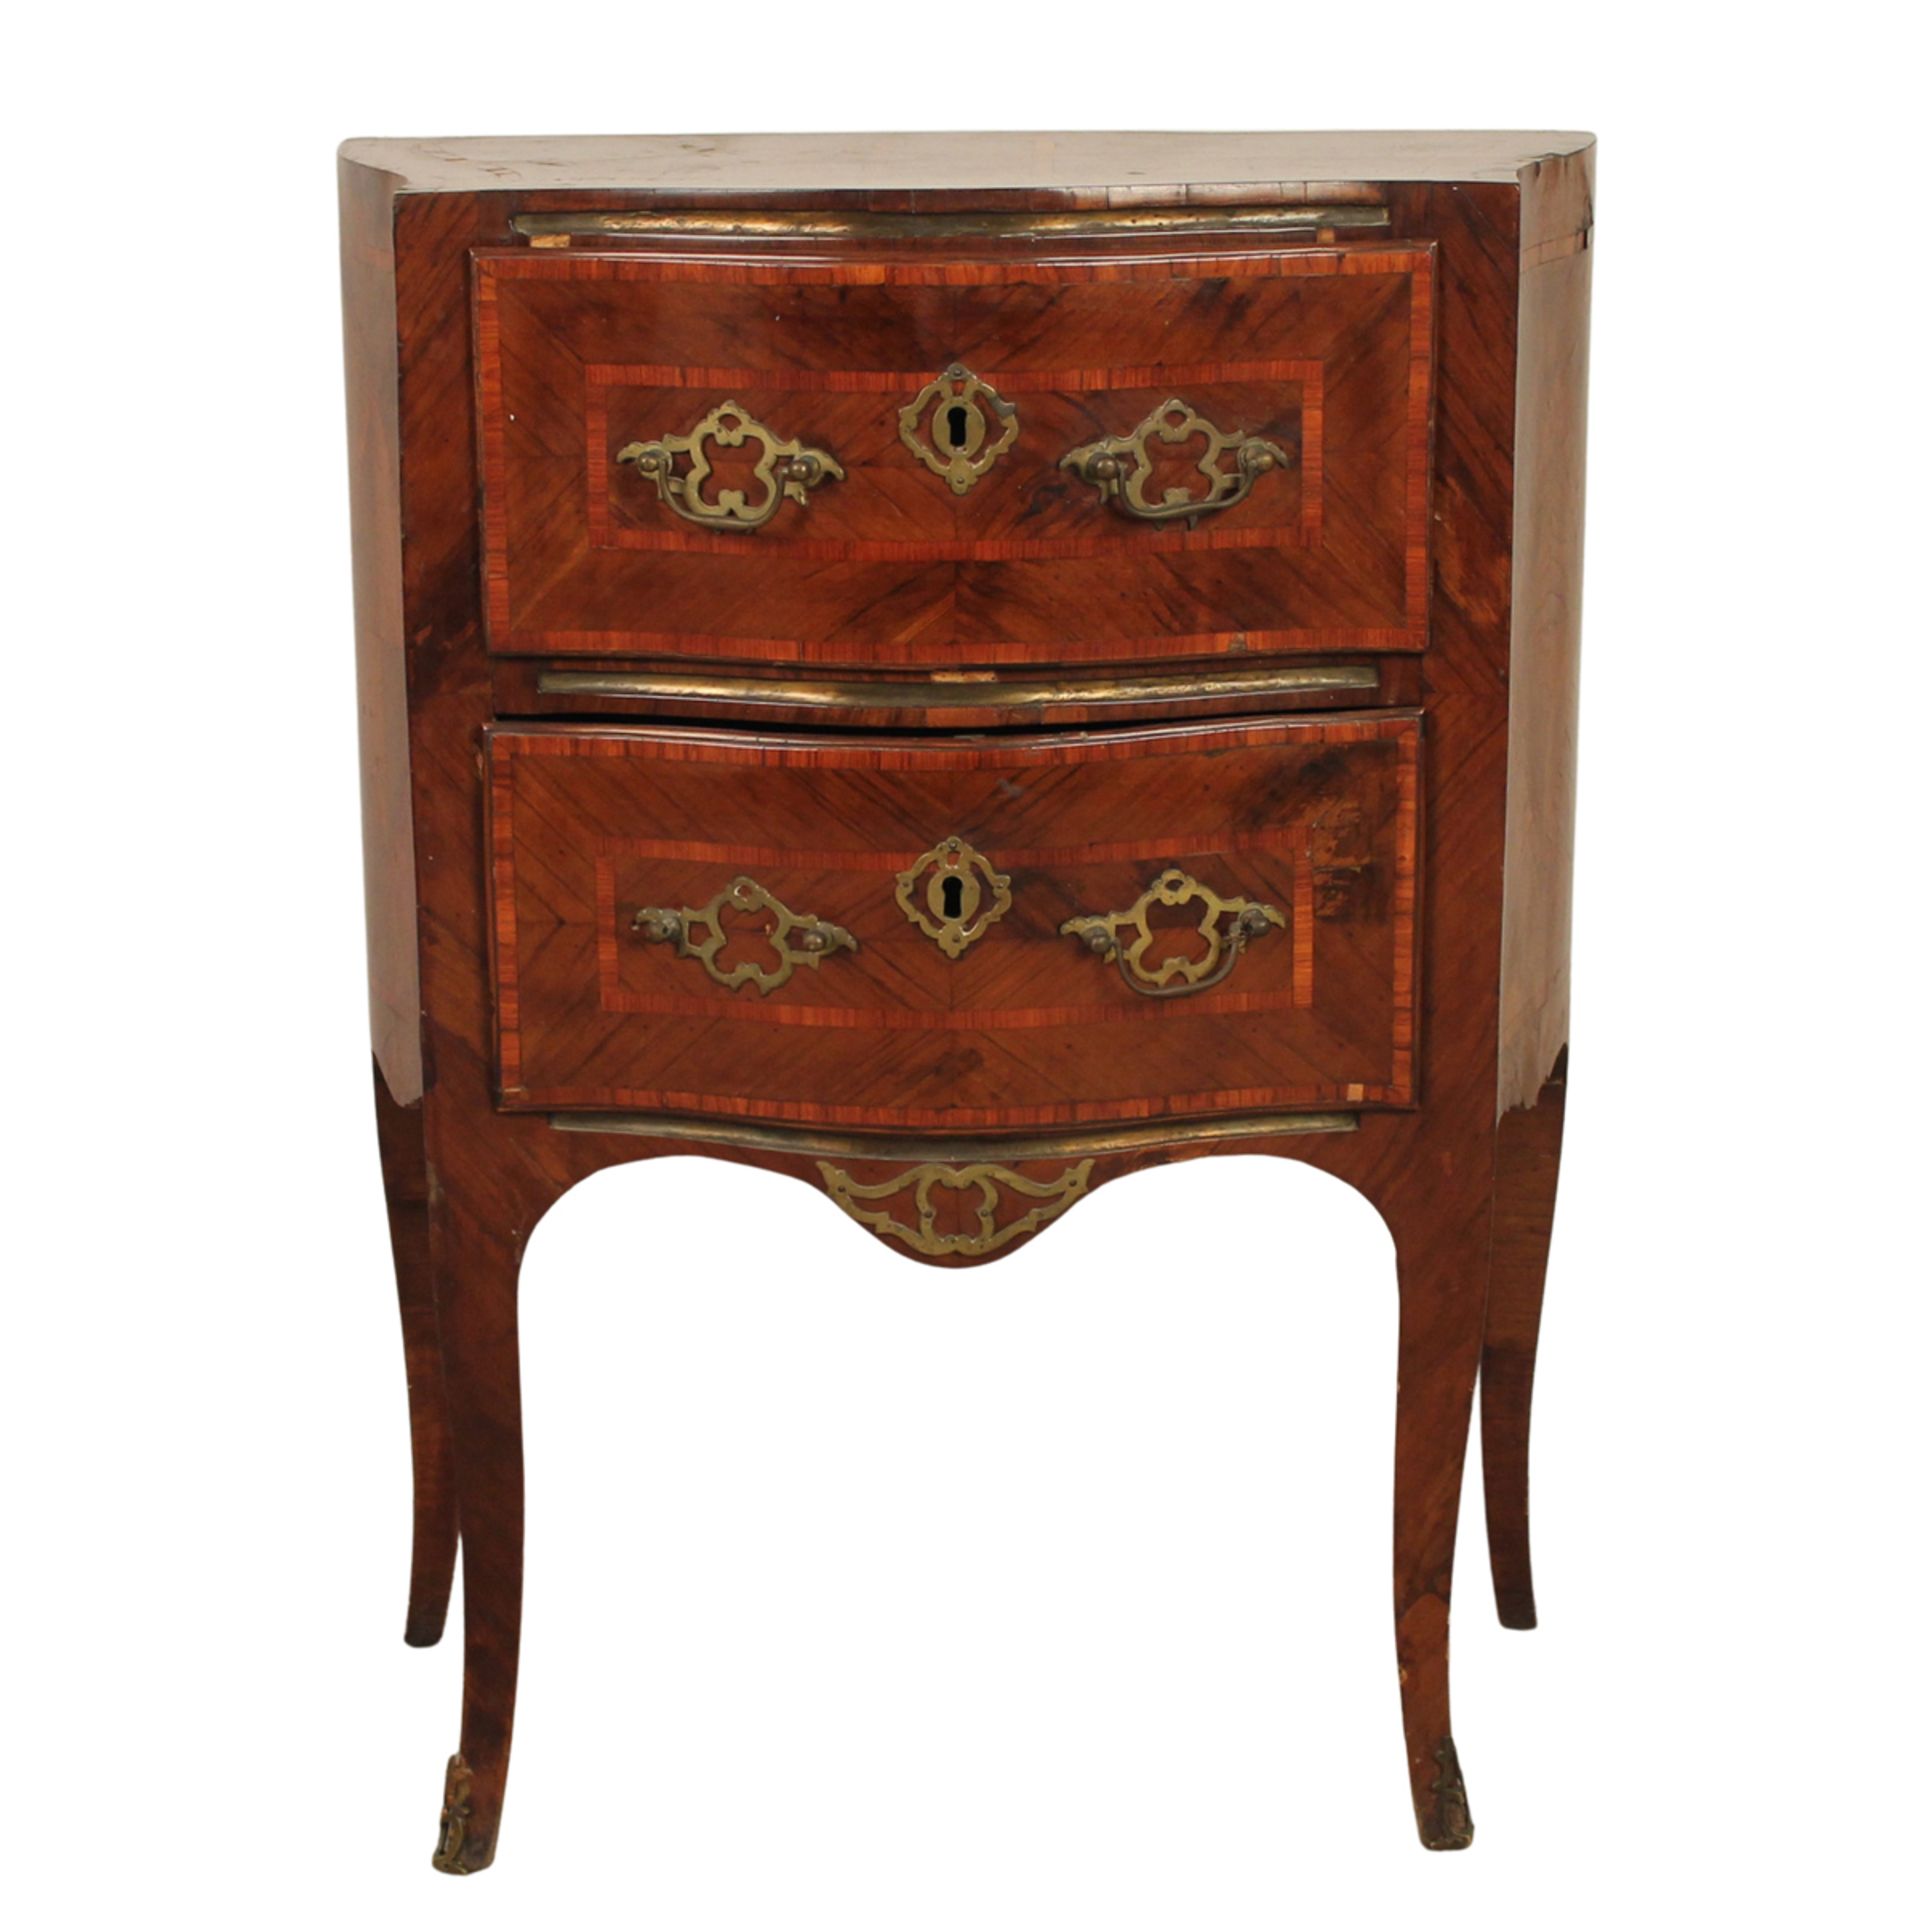 Cassettoncino a due cassetti - Small commode with two drawers